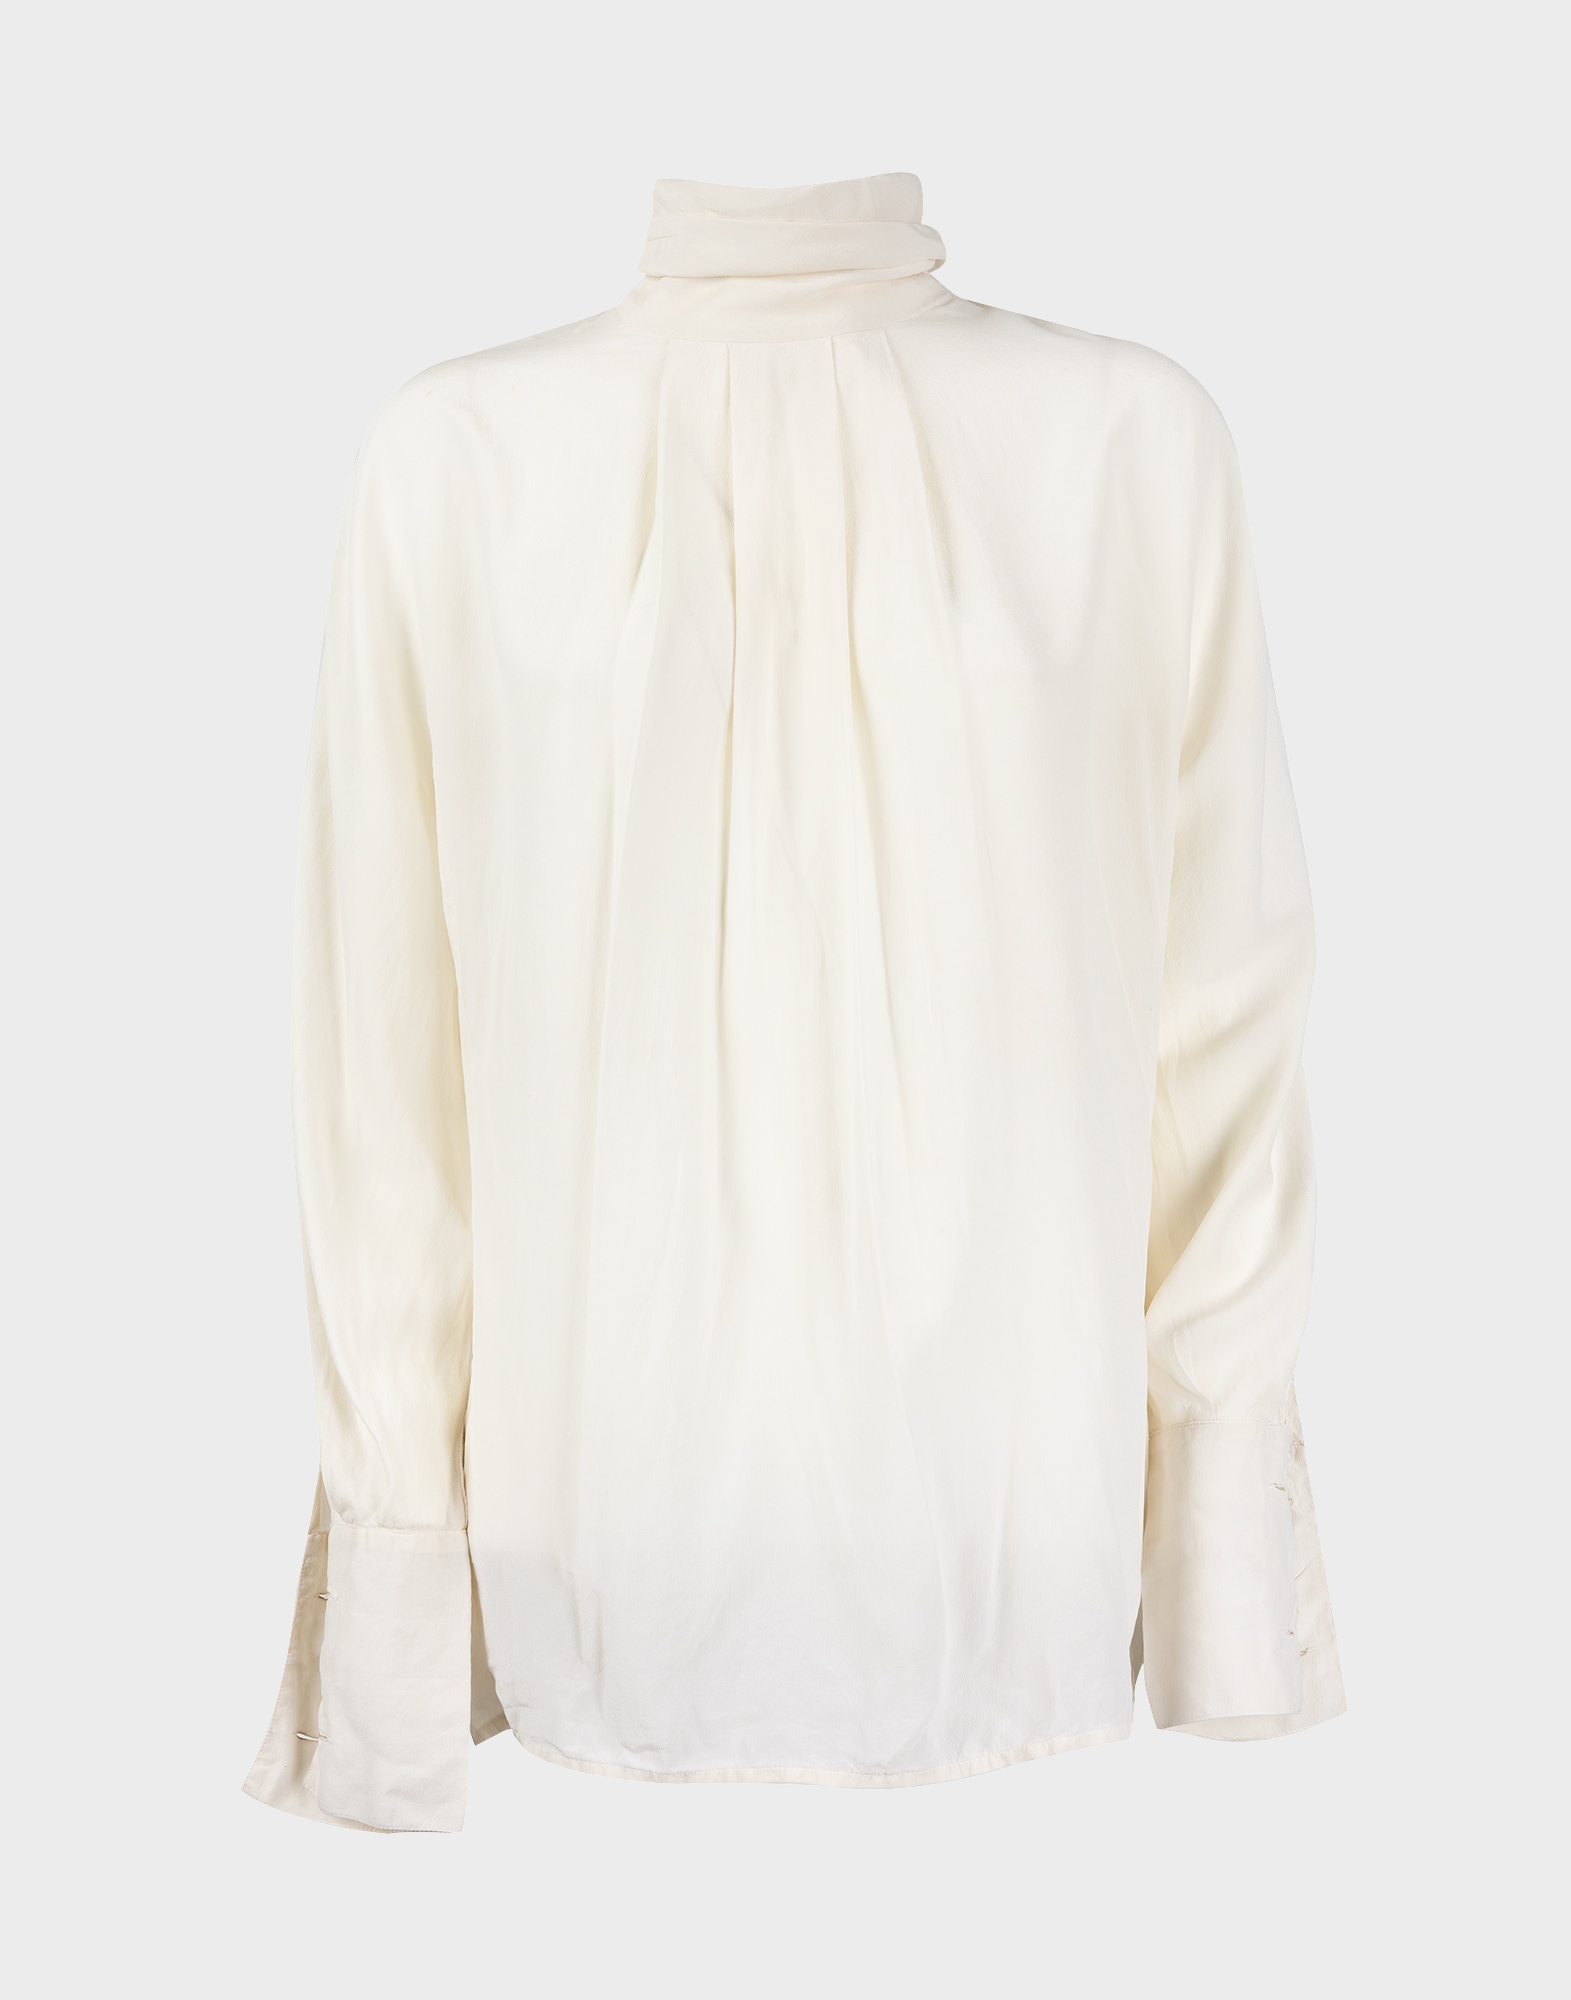 women's long-sleeved ivory silk blouse with ruffled collar and darts on the front